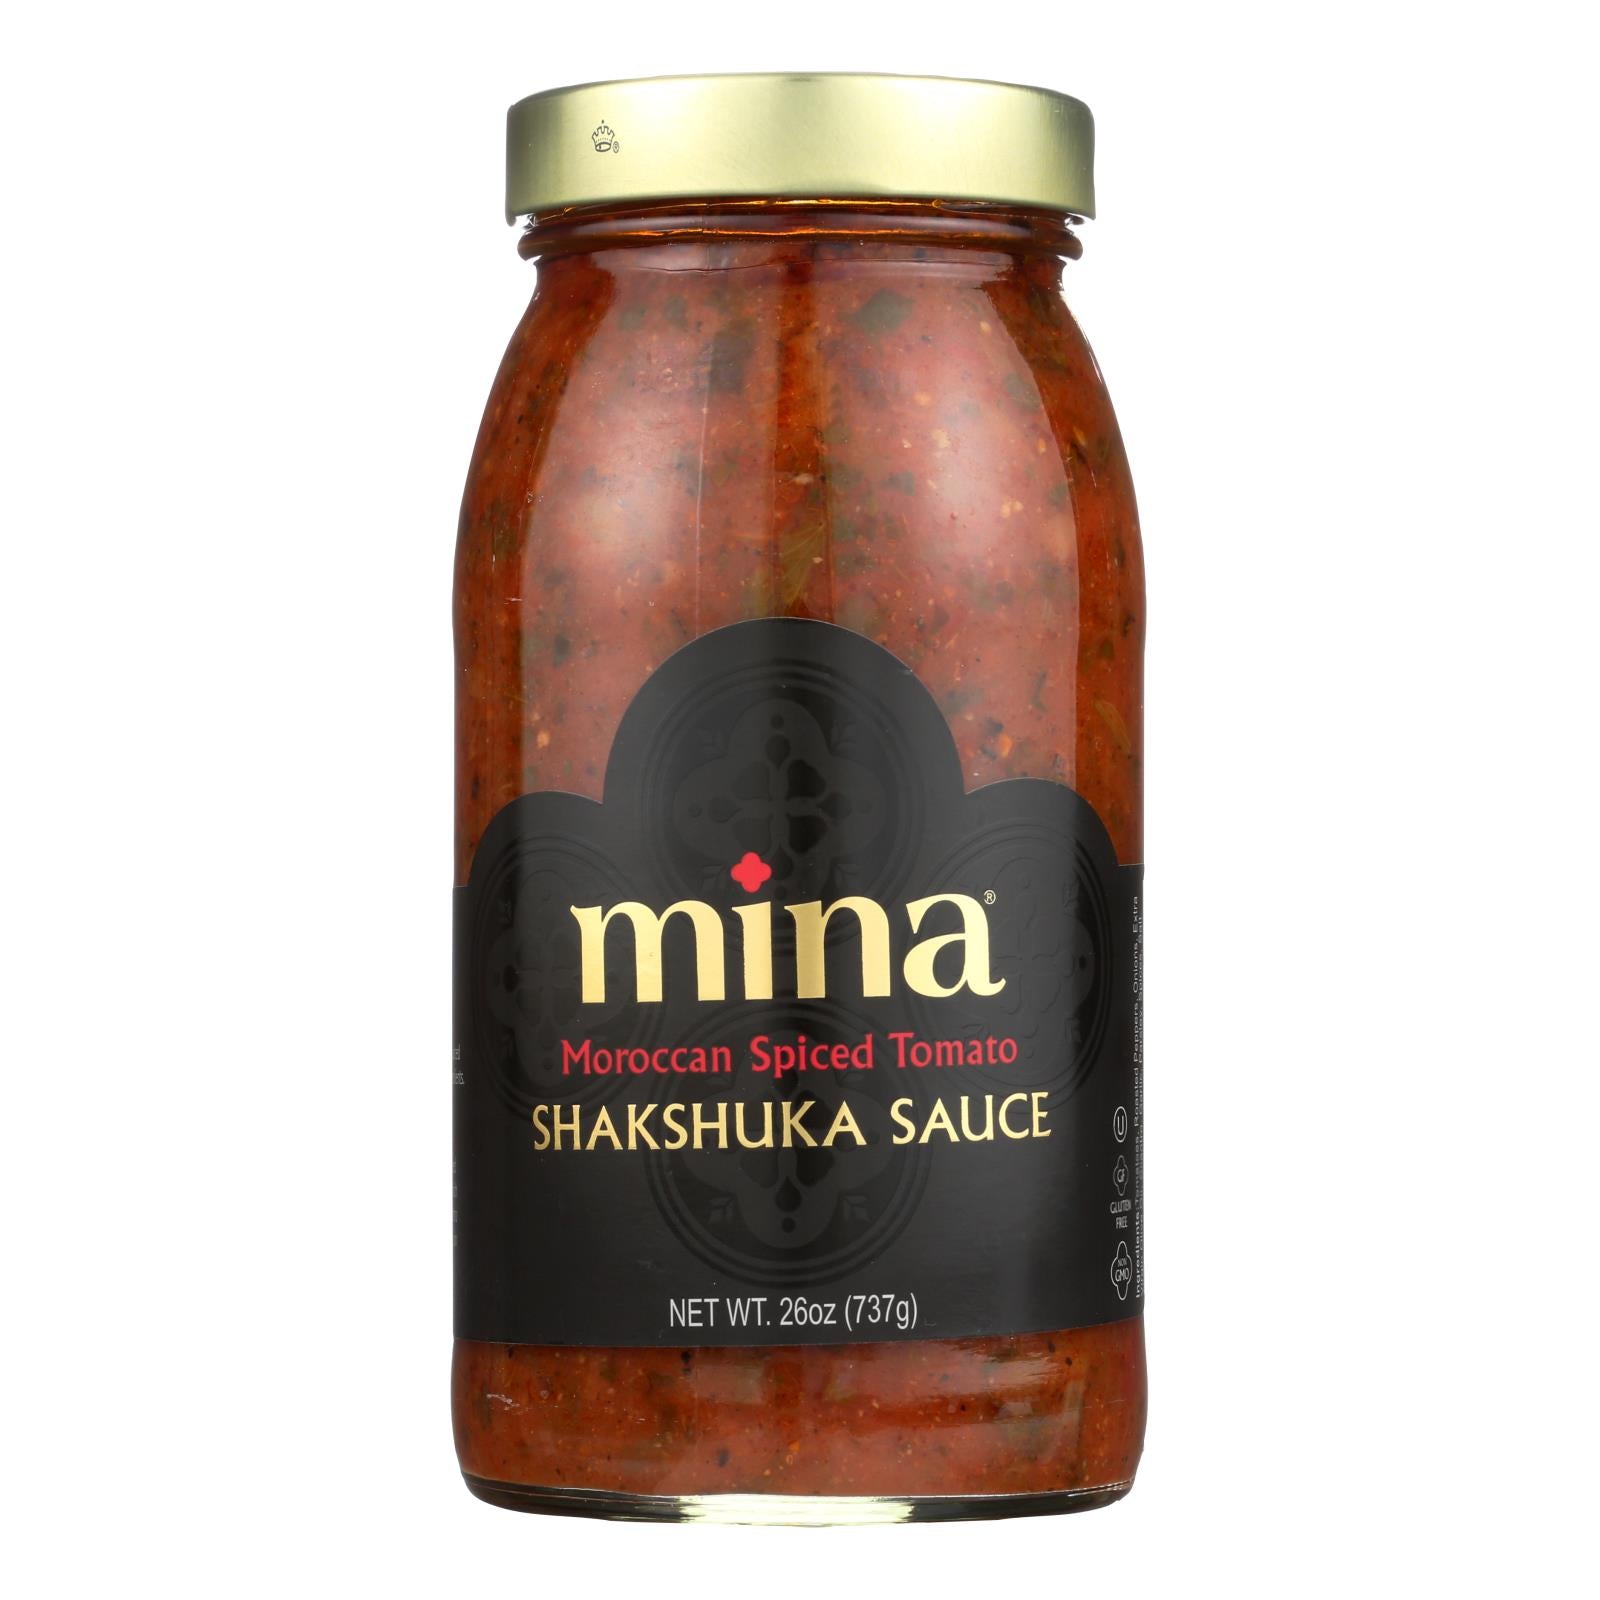 Mina, Mina's Shakshuka Sauce With Moroccan Spiced Tomato  - Case of 6 - 26 OZ (Pack of 6)